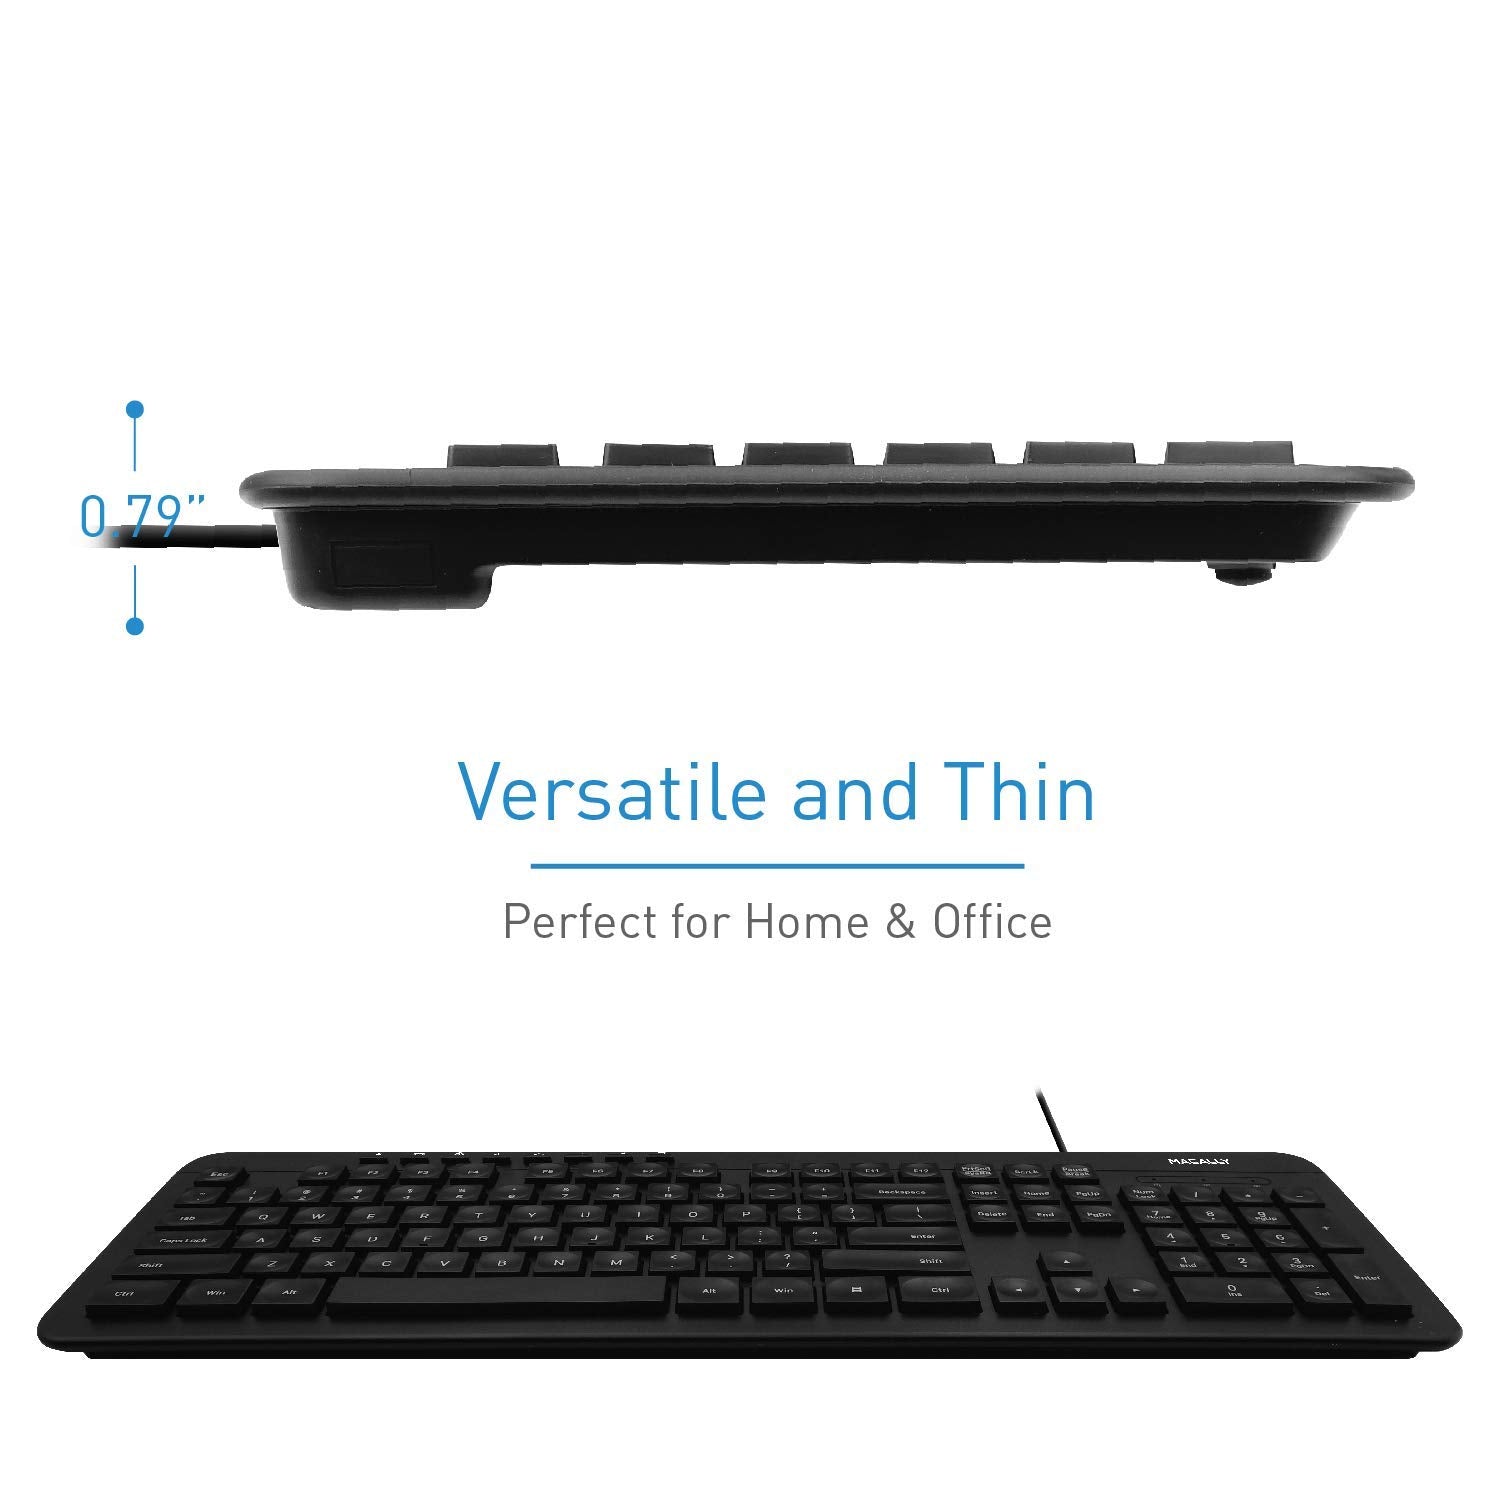 USB Wired Keyboard and Mouse Combo - yrGear Australia